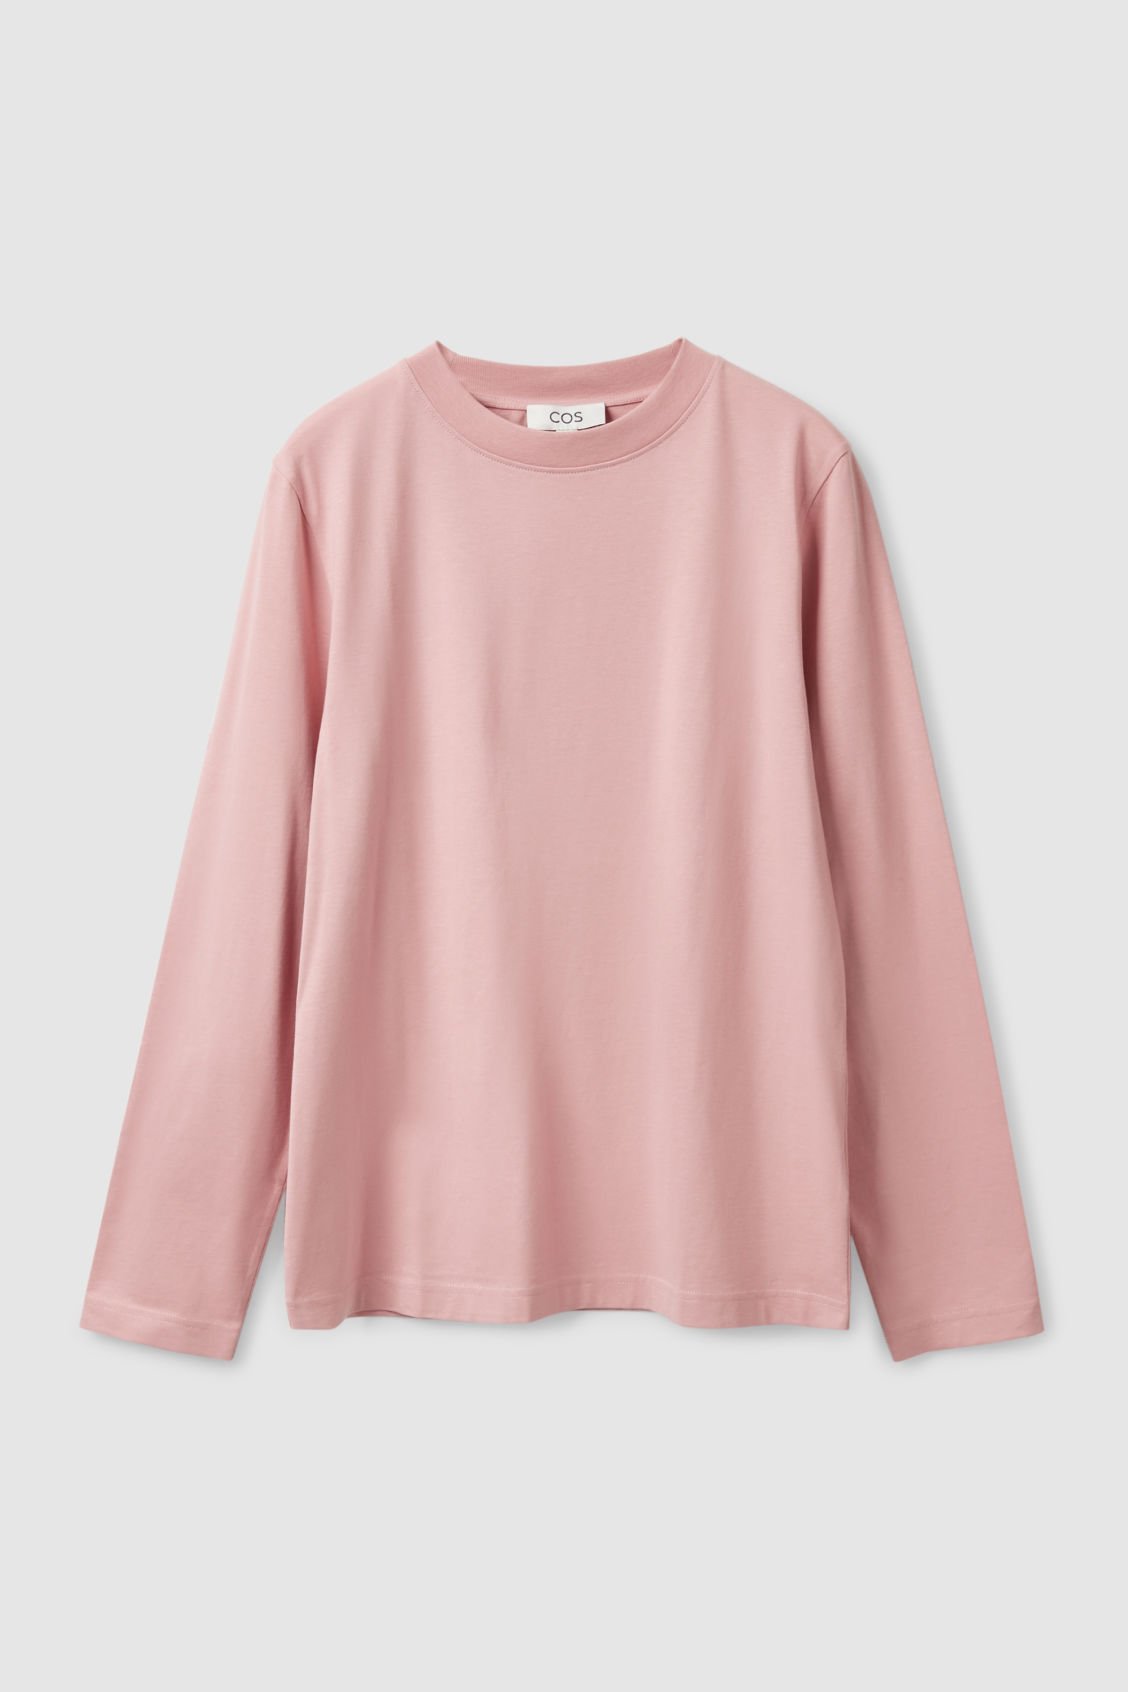 Cos Womens Cotton Long Sleeve Crew Neck Unlined Powder Pink